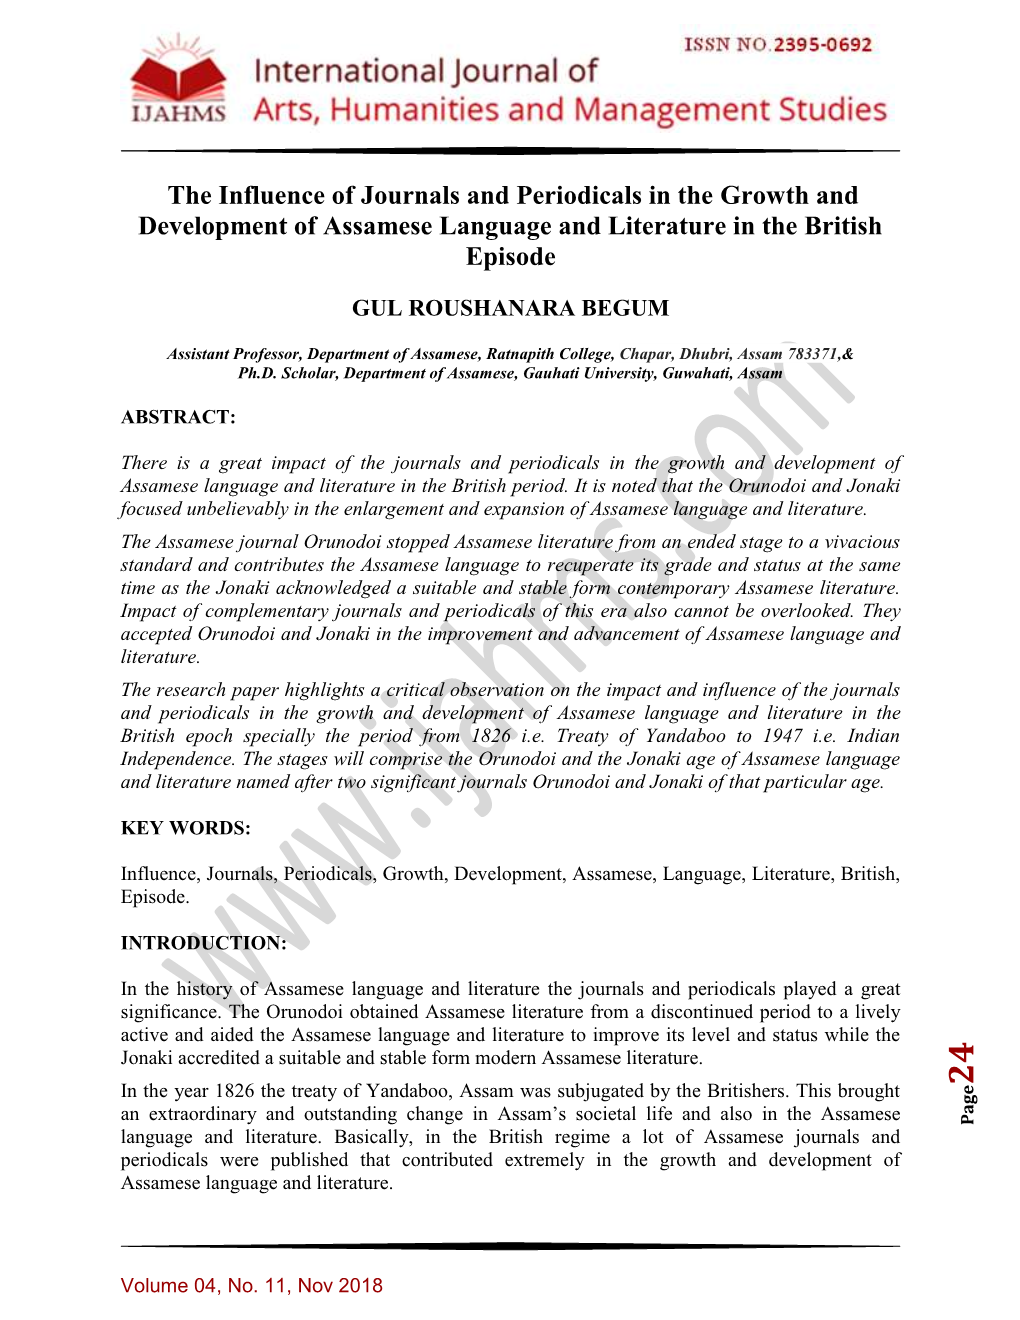 The Influence of Journals and Periodicals in the Growth and Development of Assamese Language and Literature in the British Episode